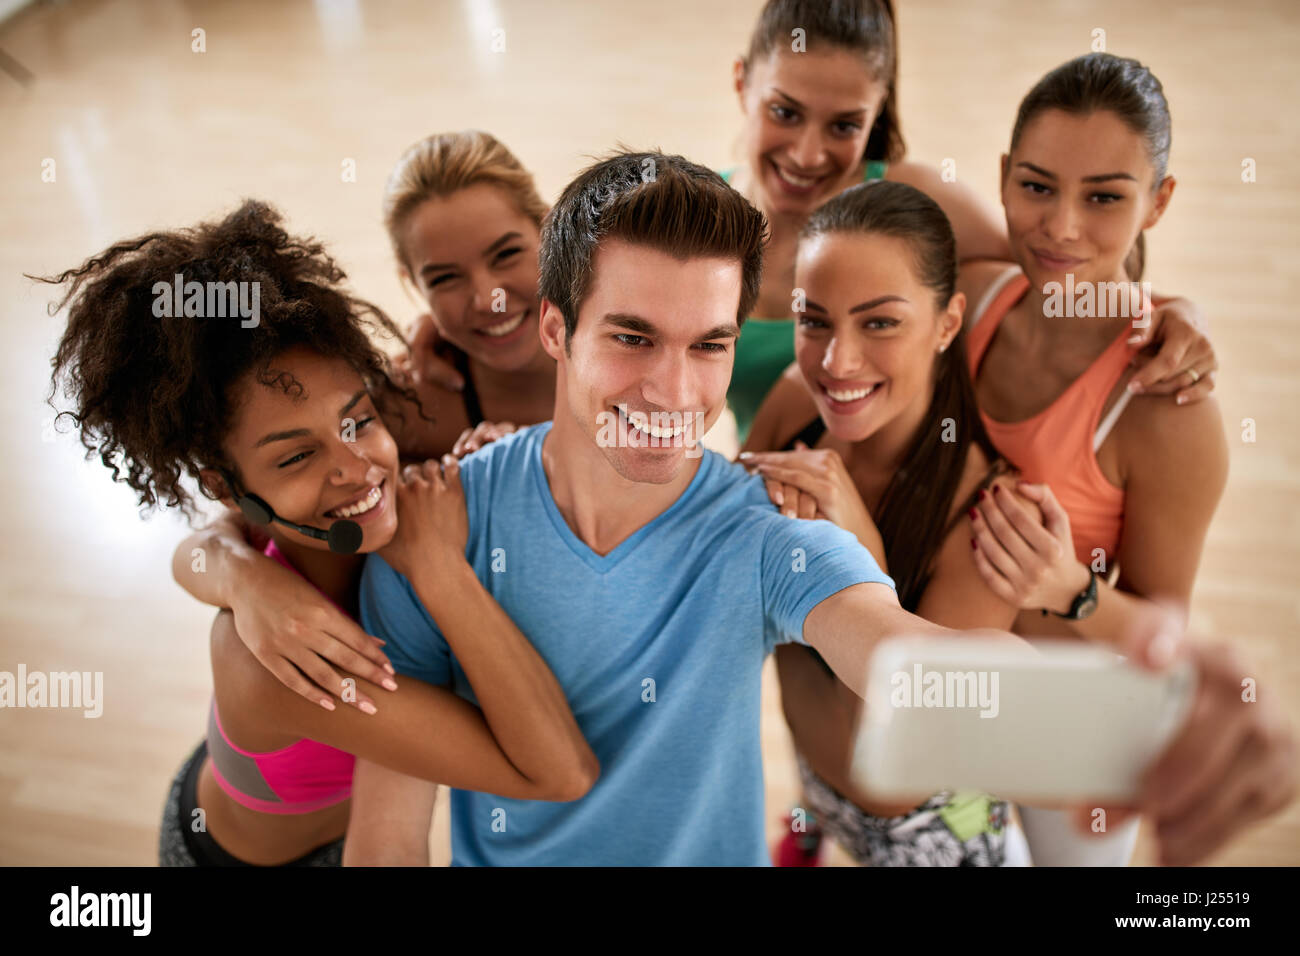 Sports group in fitness gym make group selfie Stock Photo